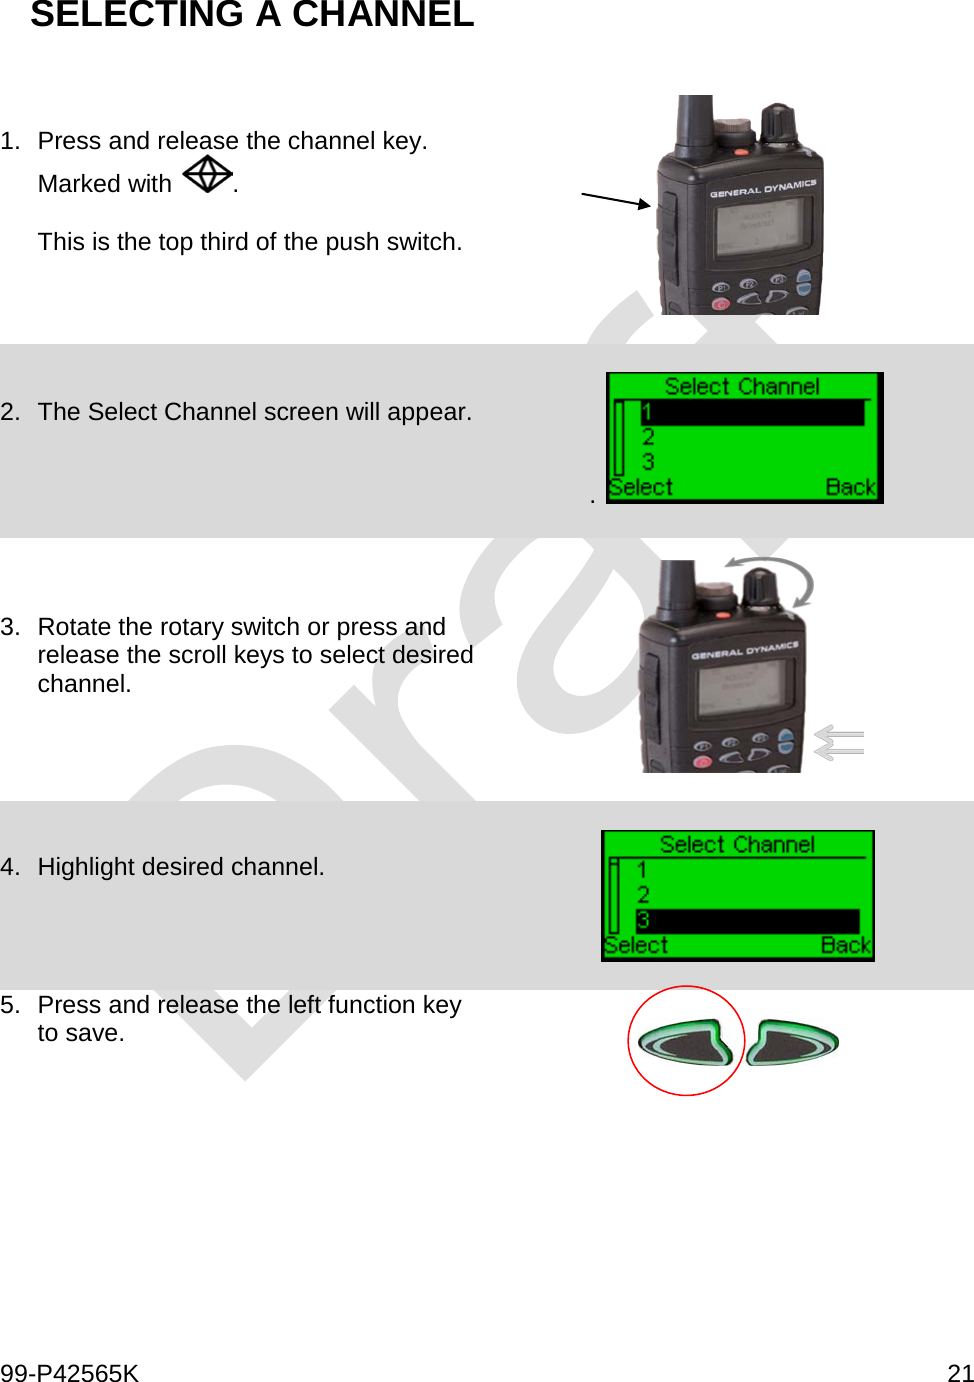  99-P42565K     21  SELECTING A CHANNEL  1. Press and release the channel key. Marked with  .   This is the top third of the push switch.         2.  The Select Channel screen will appear.    .    3. Rotate the rotary switch or press and release the scroll keys to select desired channel.    4. Highlight desired channel.      5. Press and release the left function key to save.        